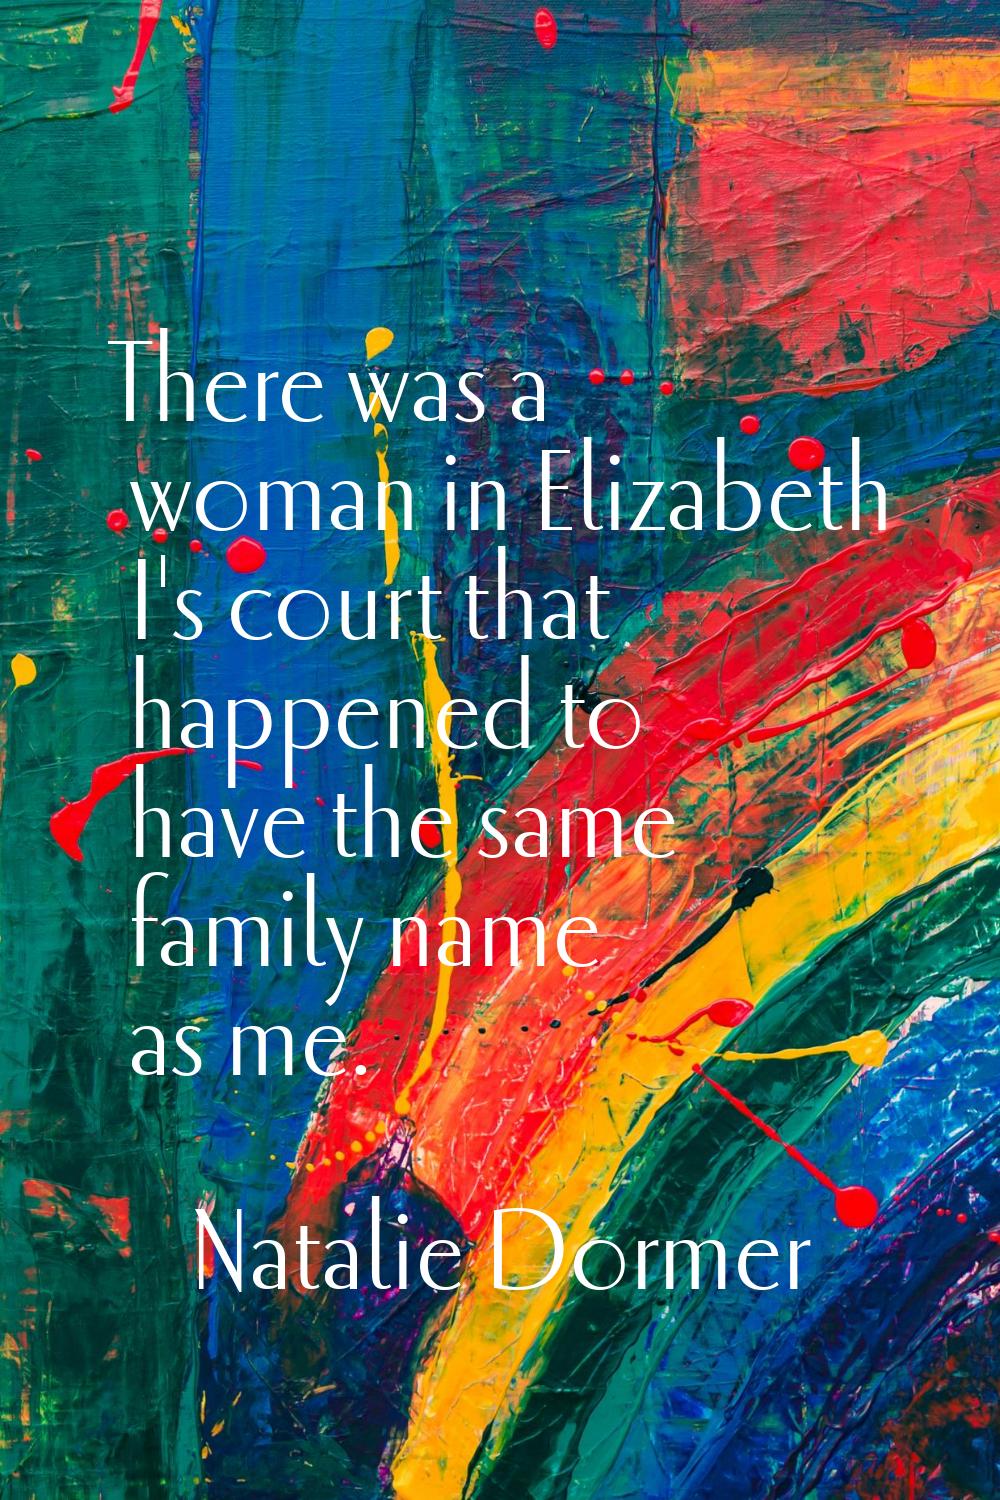 There was a woman in Elizabeth I's court that happened to have the same family name as me.